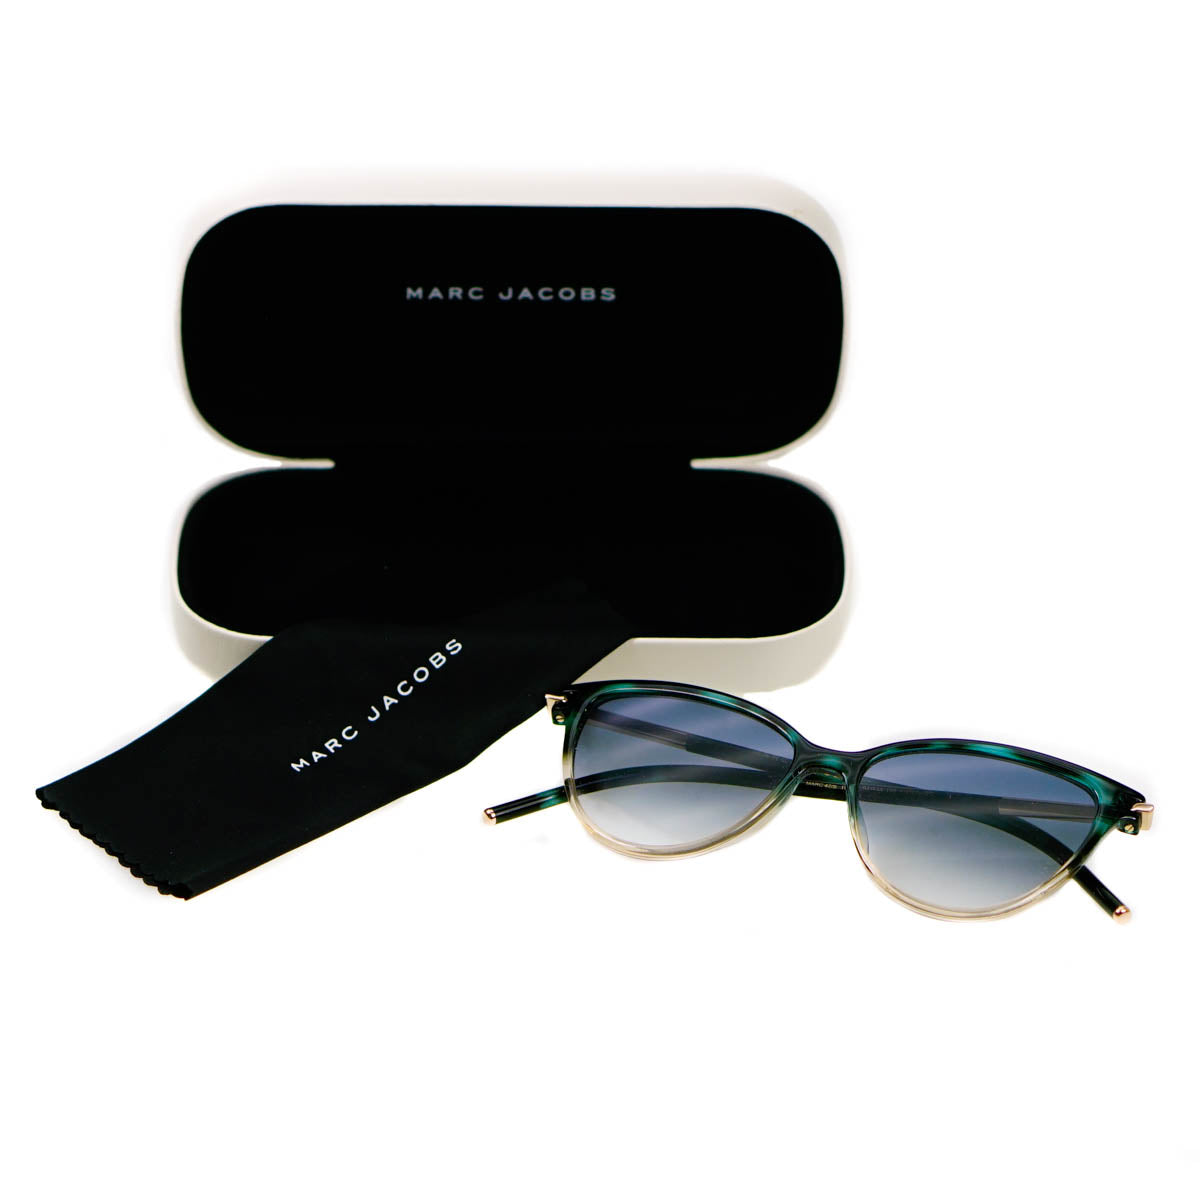 Marc Jacobs Cateye Teal Pink Sunglasses 47S TOZ08 